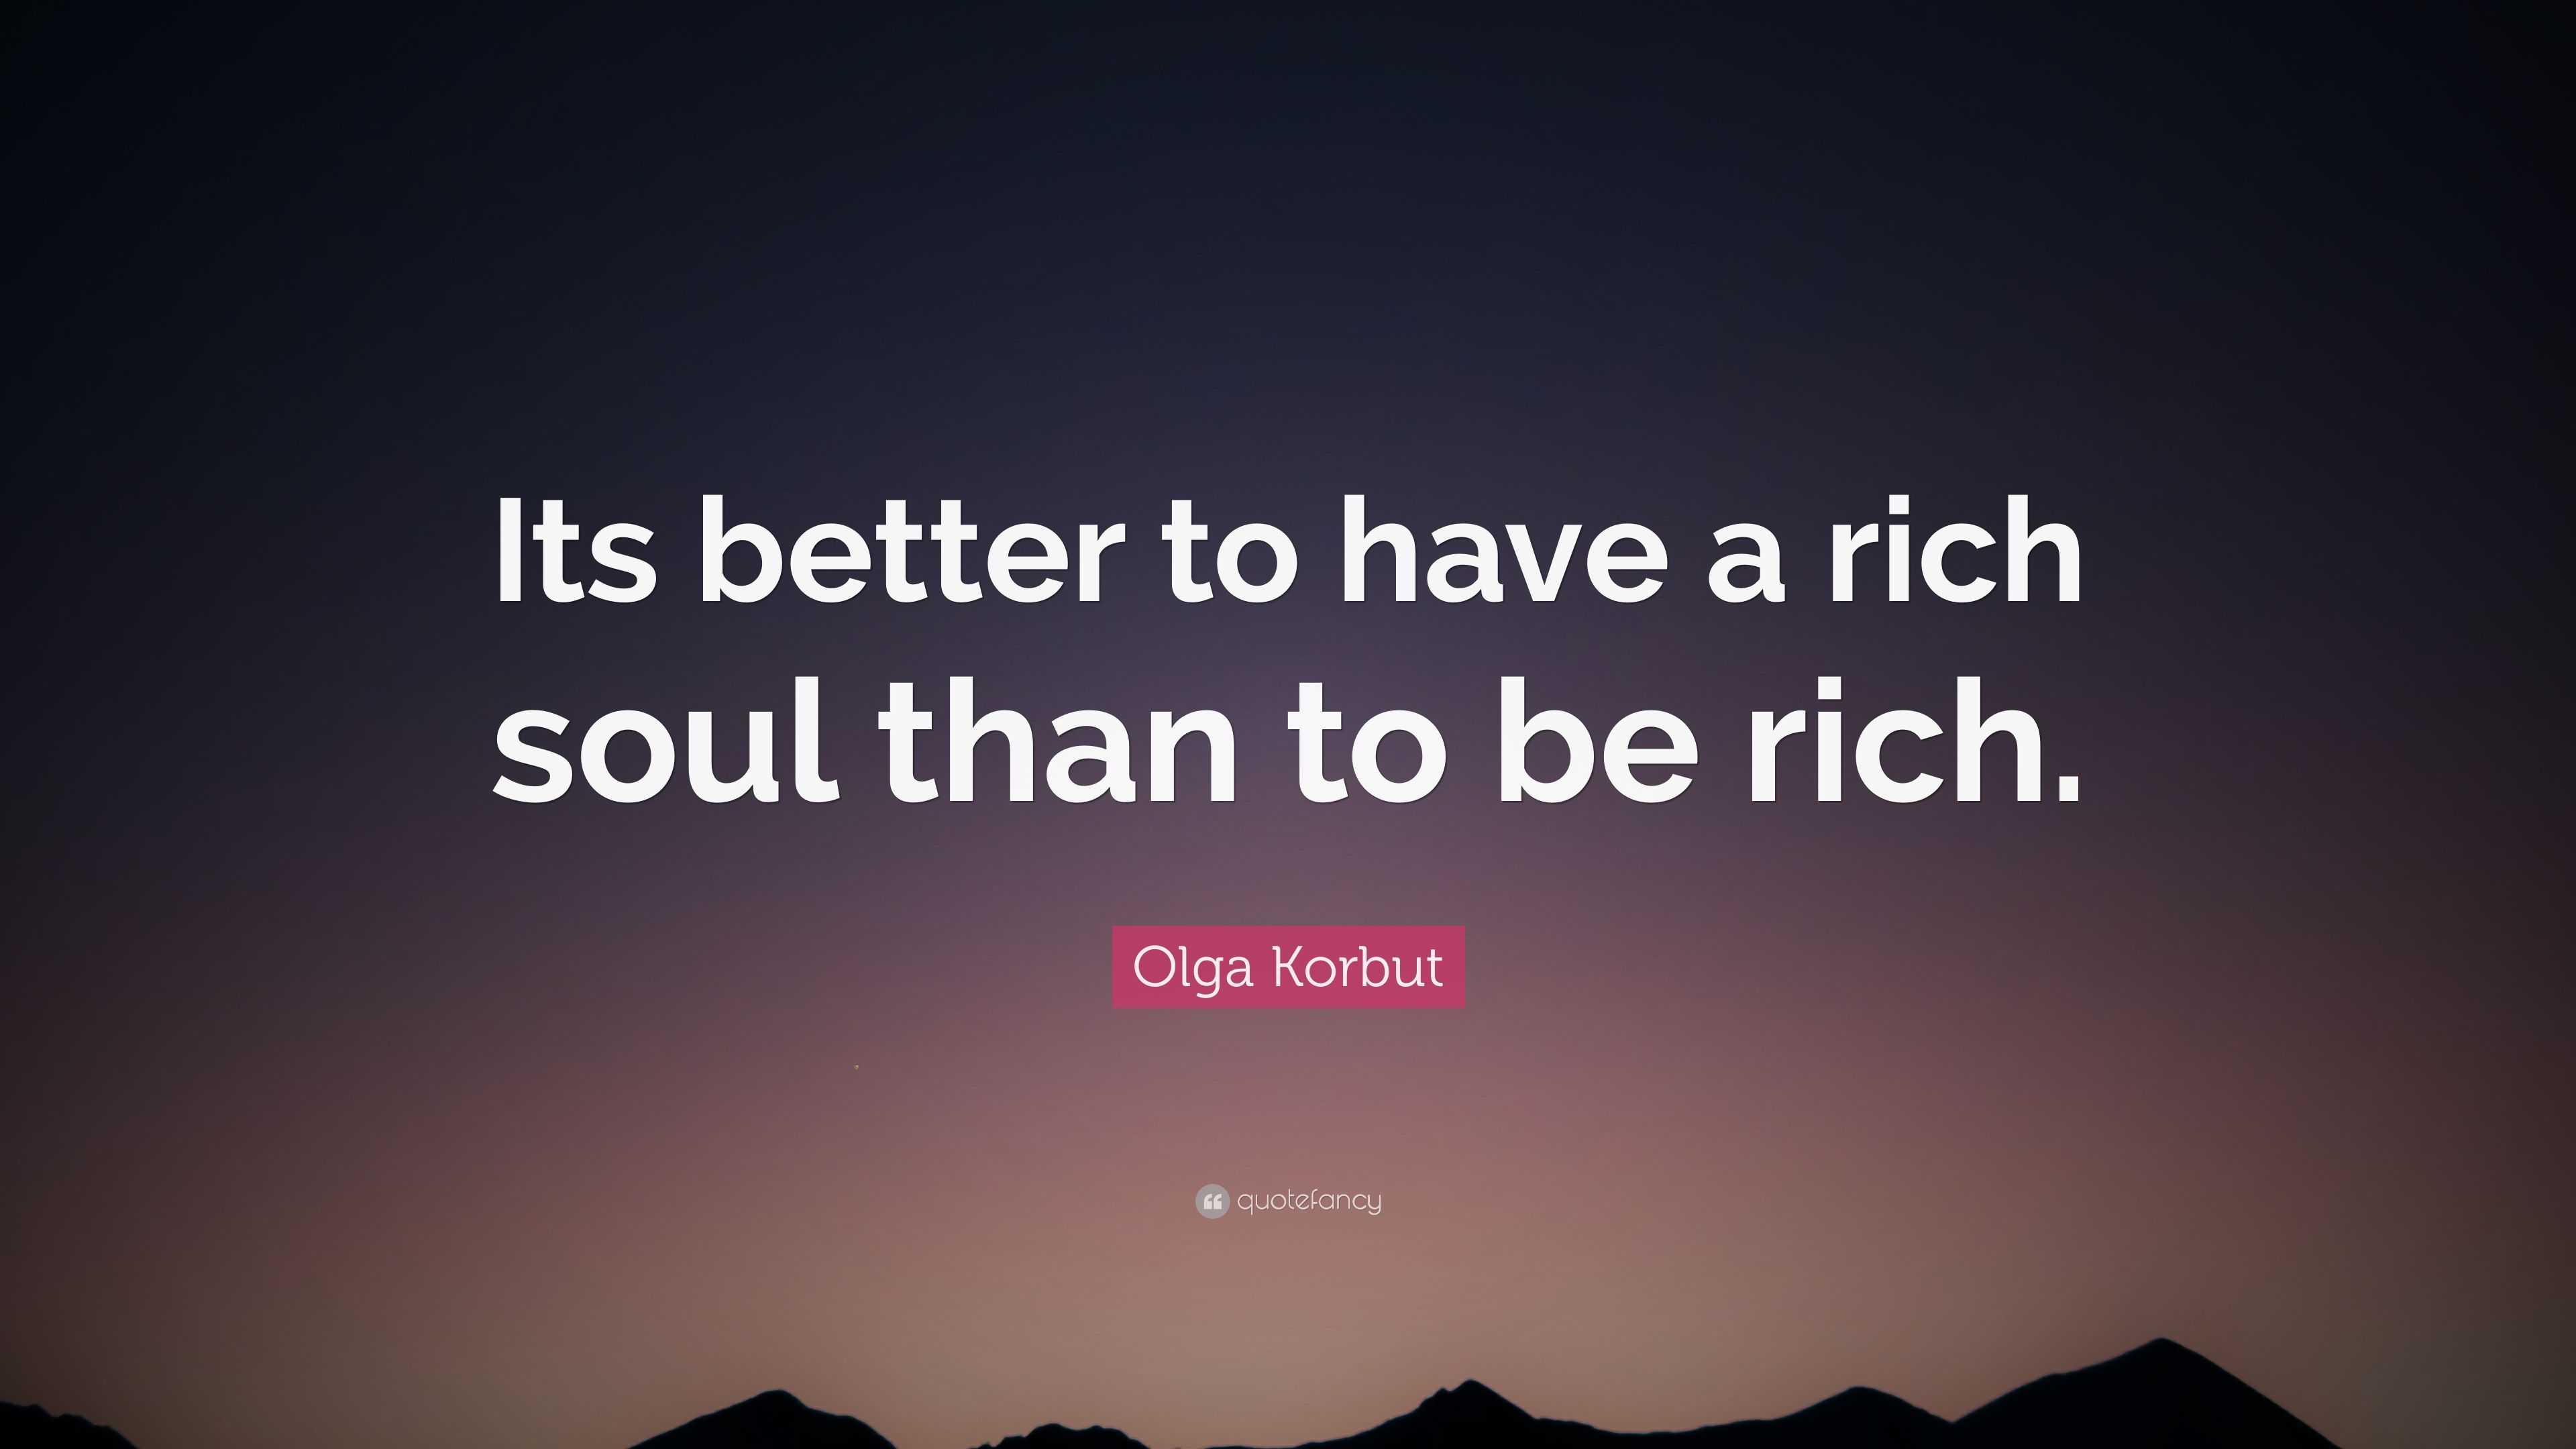 Olga Korbut Quote: “Its better to have a rich soul than to be rich.”